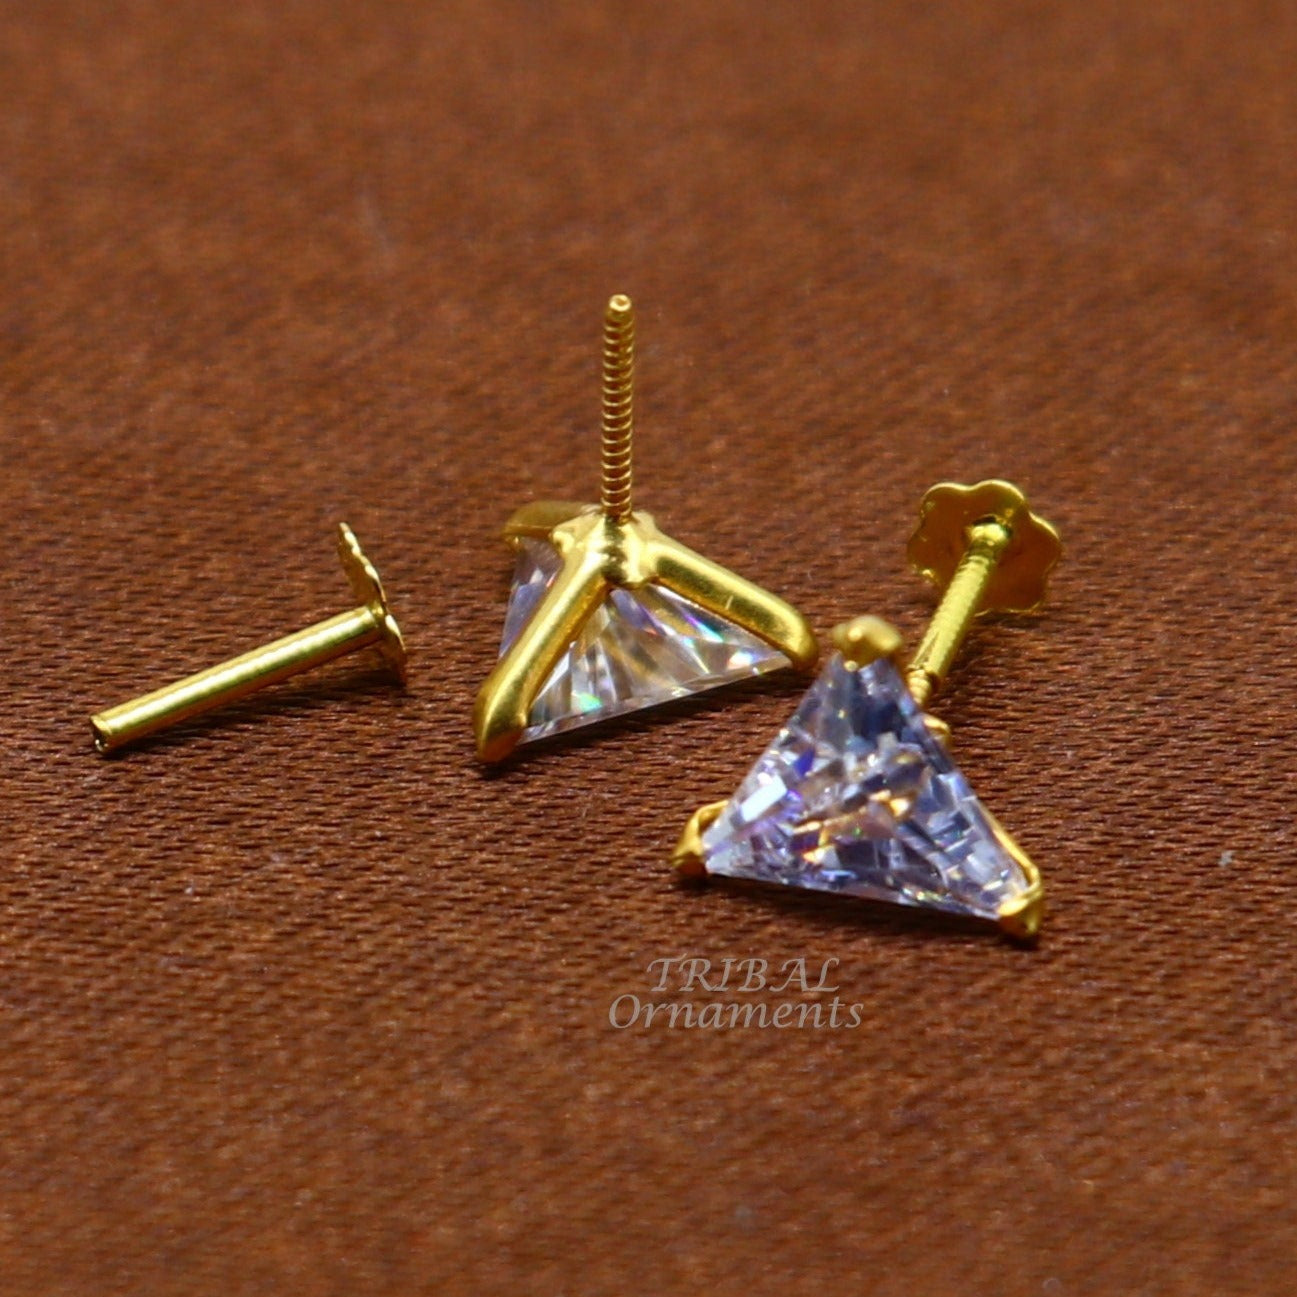 New Amethyst Stone Studs Gold Plated Finish Shop Online ER3784